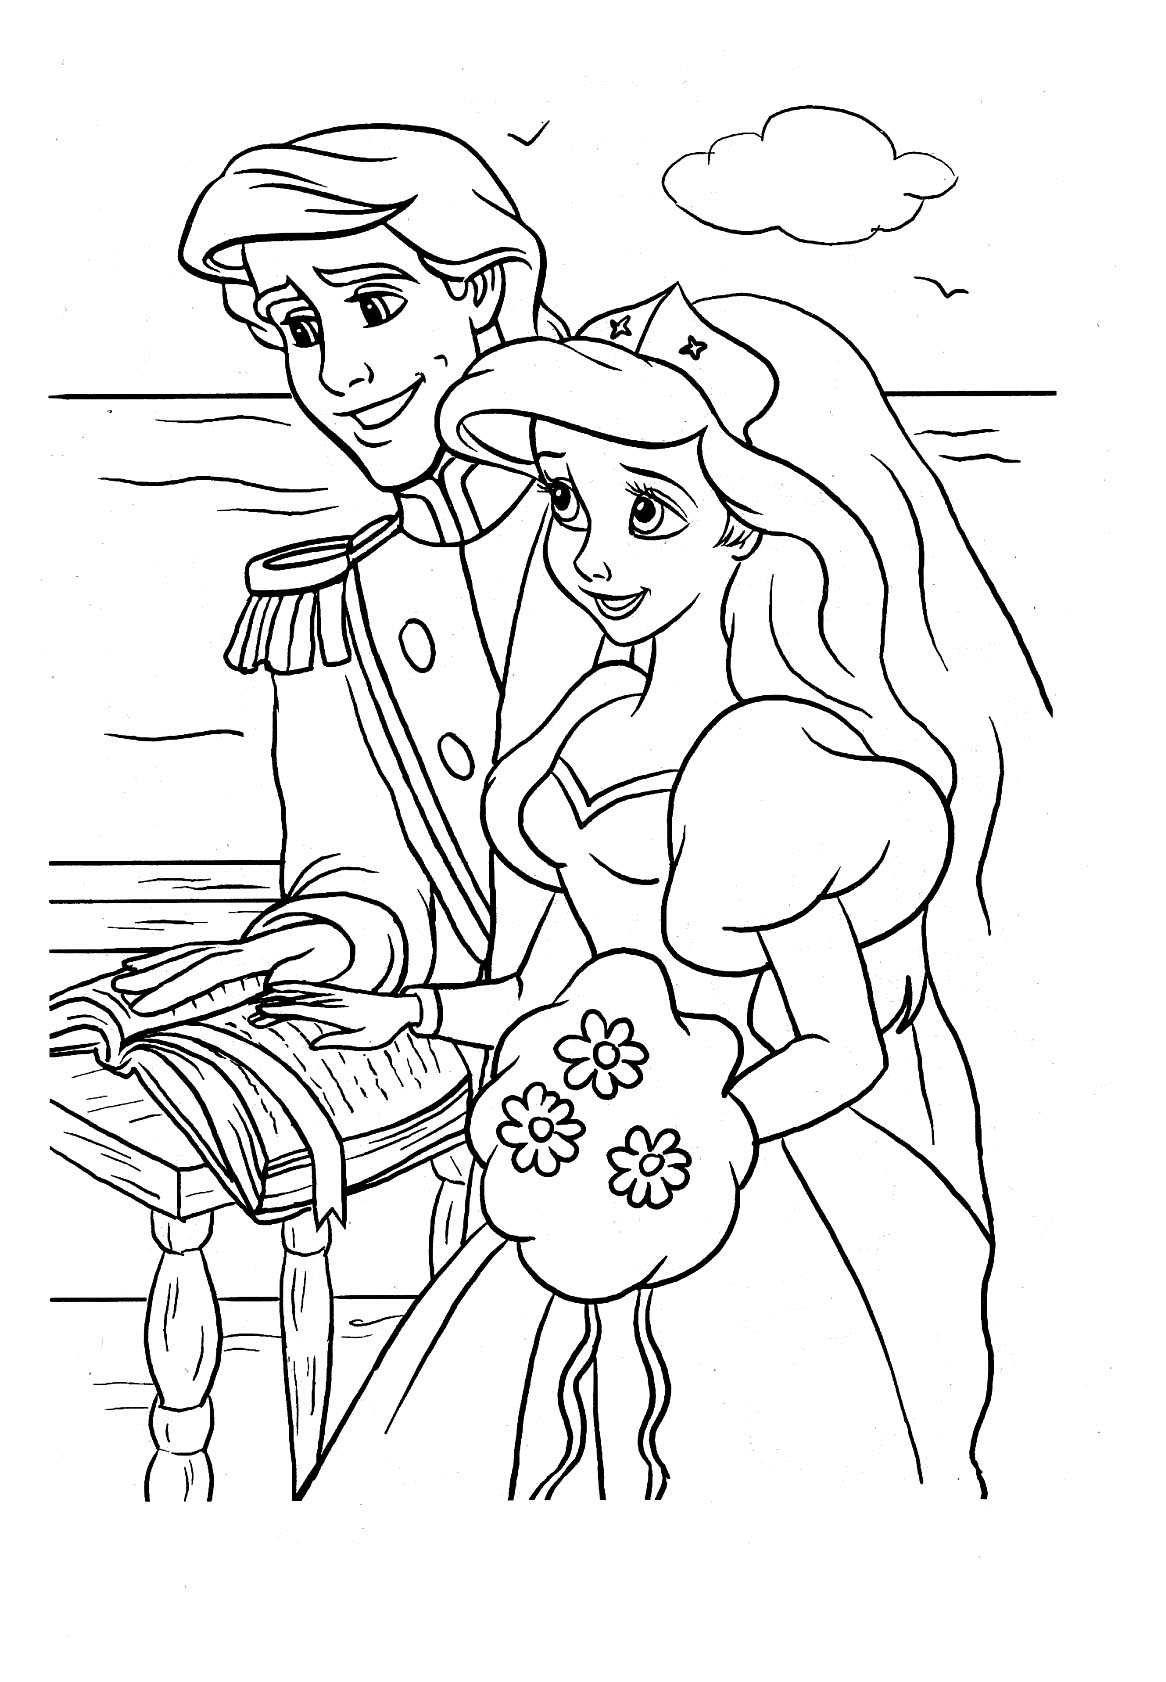 Simple The Little Mermaid coloring page for children